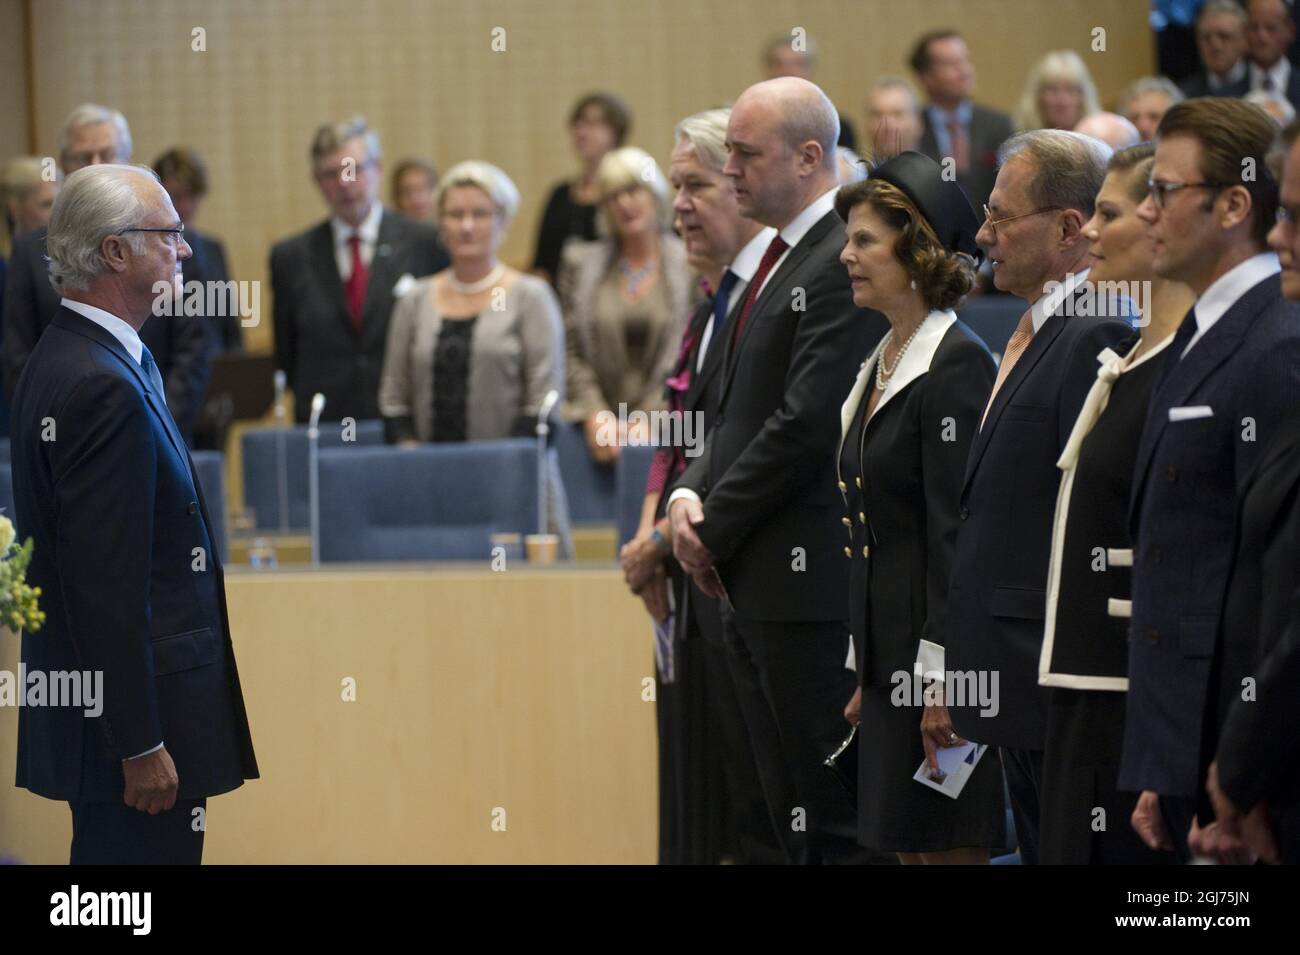 King Carl Gustaf with Prime Minister Fredrik Reinfeldt, Queen Silvia, Speaker of the House of Parliament, Per Westerberg, Crown Princess Victoria and Prince Daniel during the opening of the House of the Parliament in Stockholm, Sweden, September 15, 2011. Stock Photo